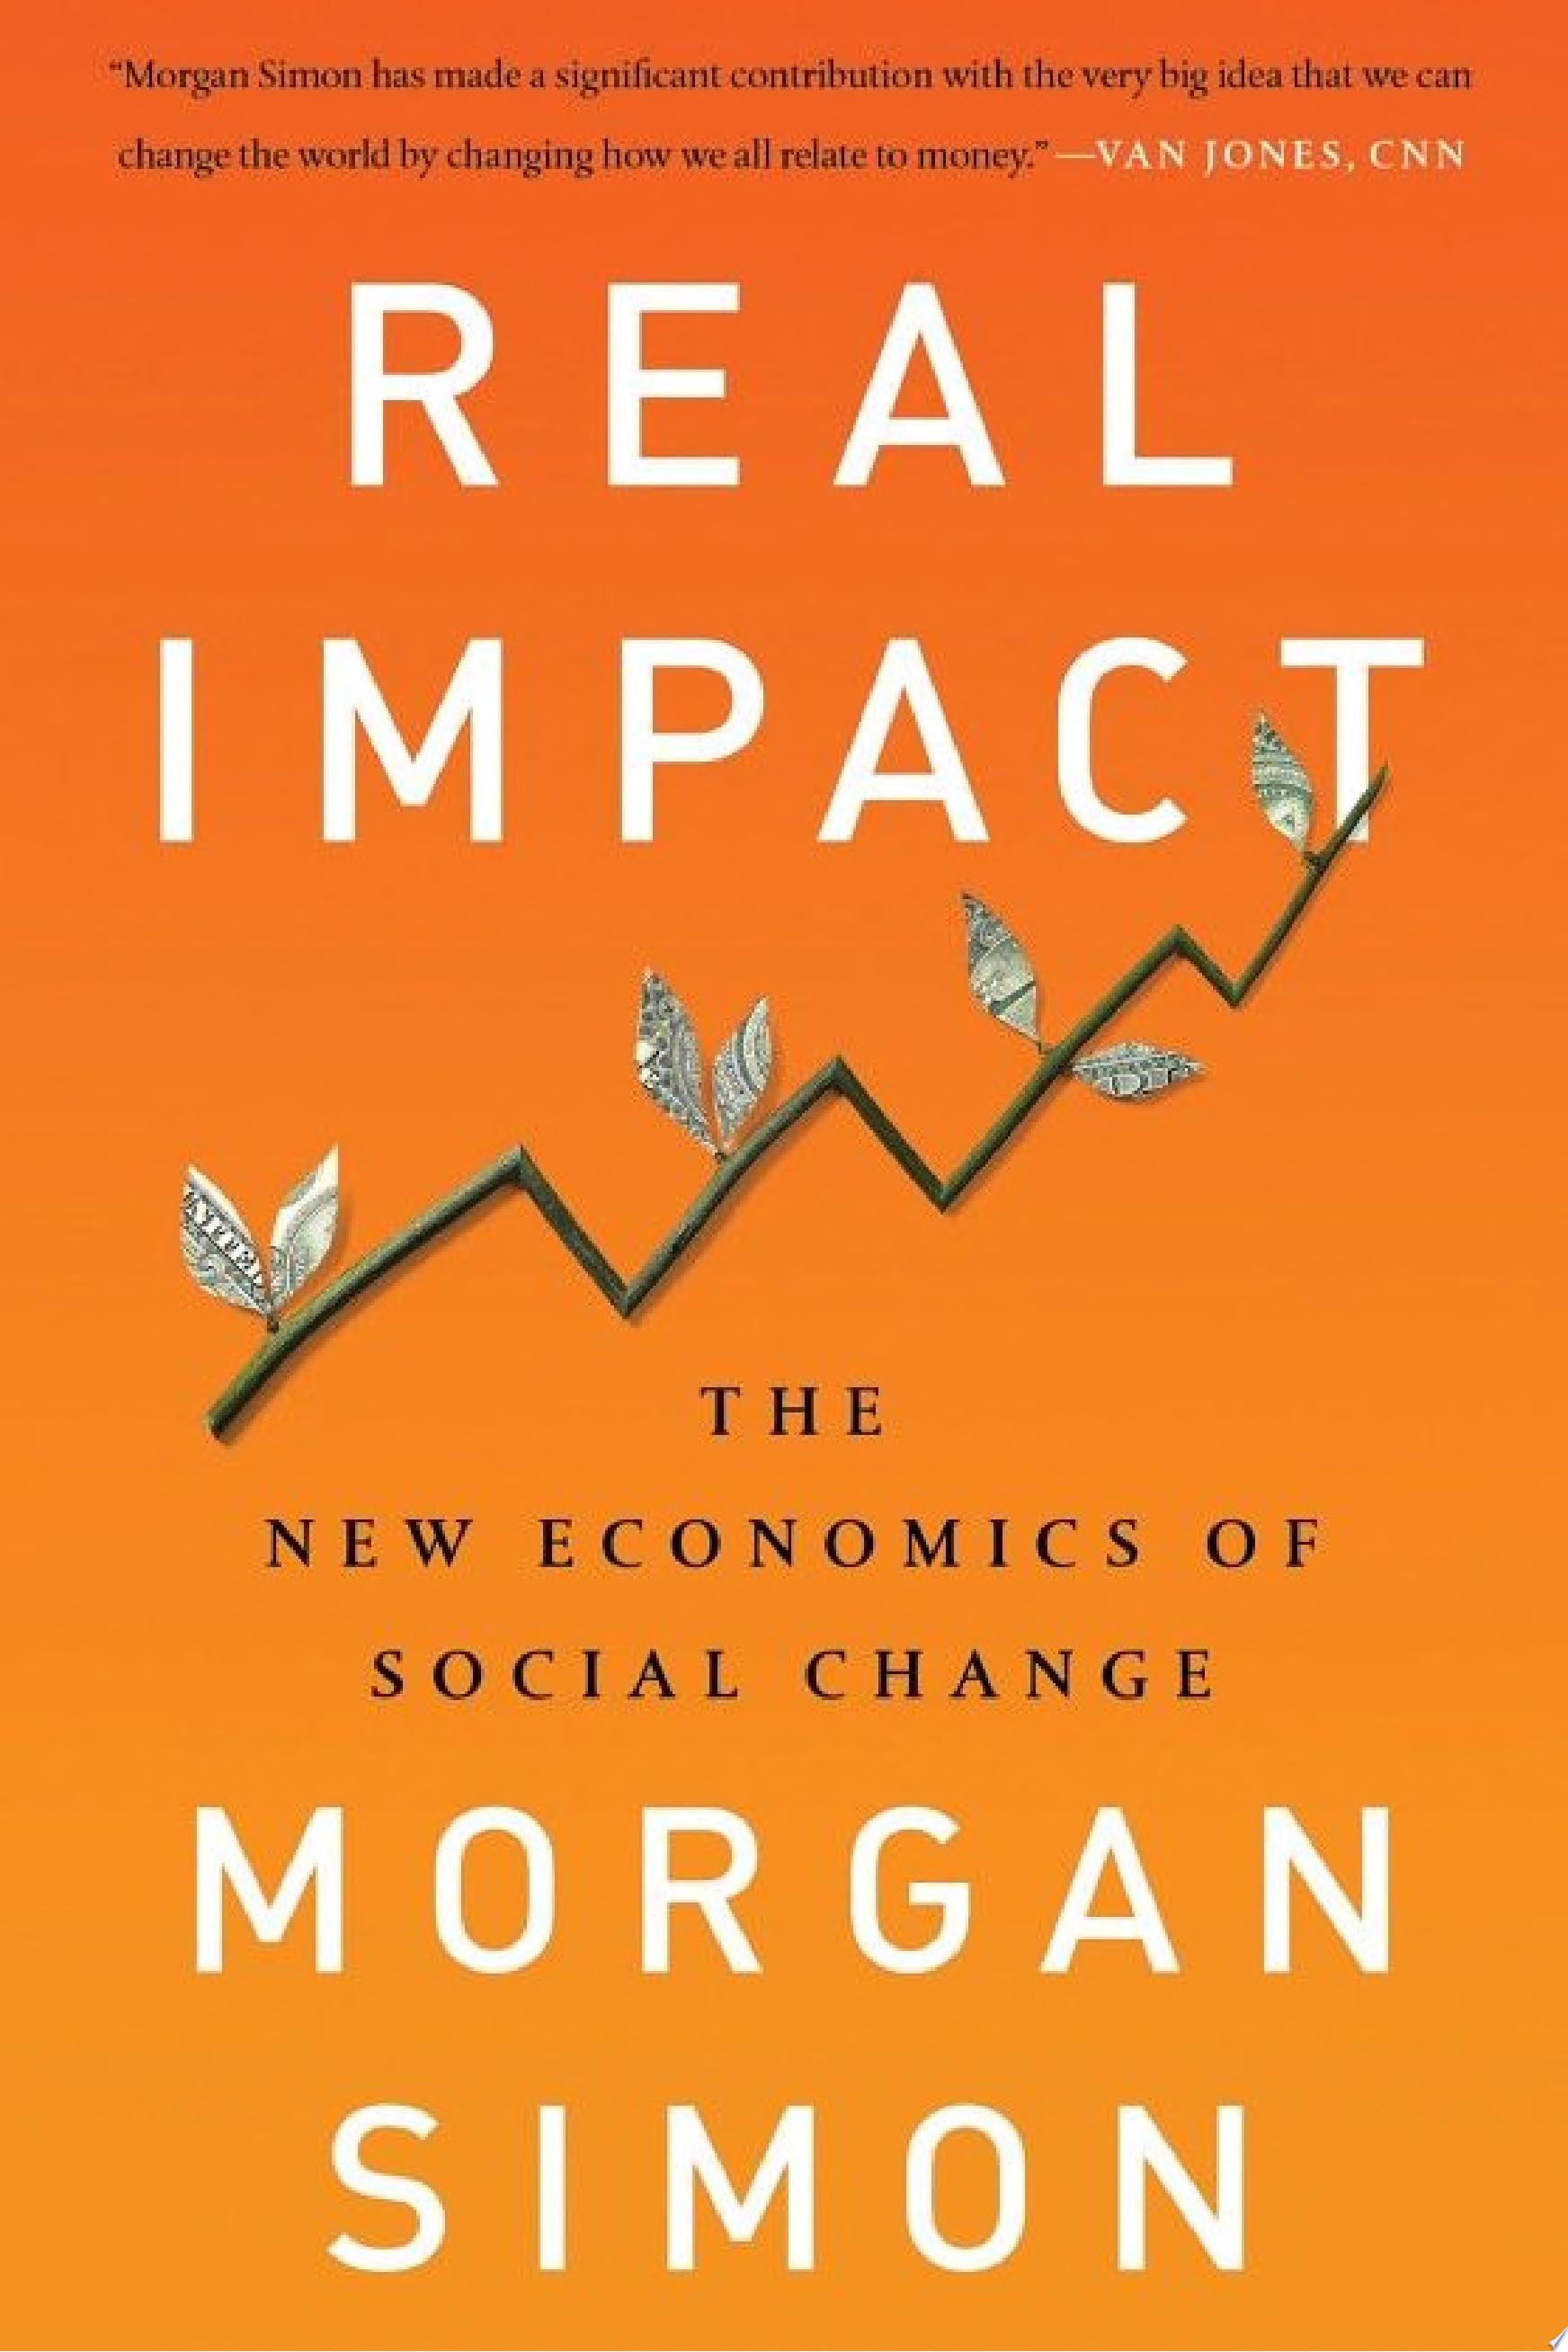 Image for "Real Impact"